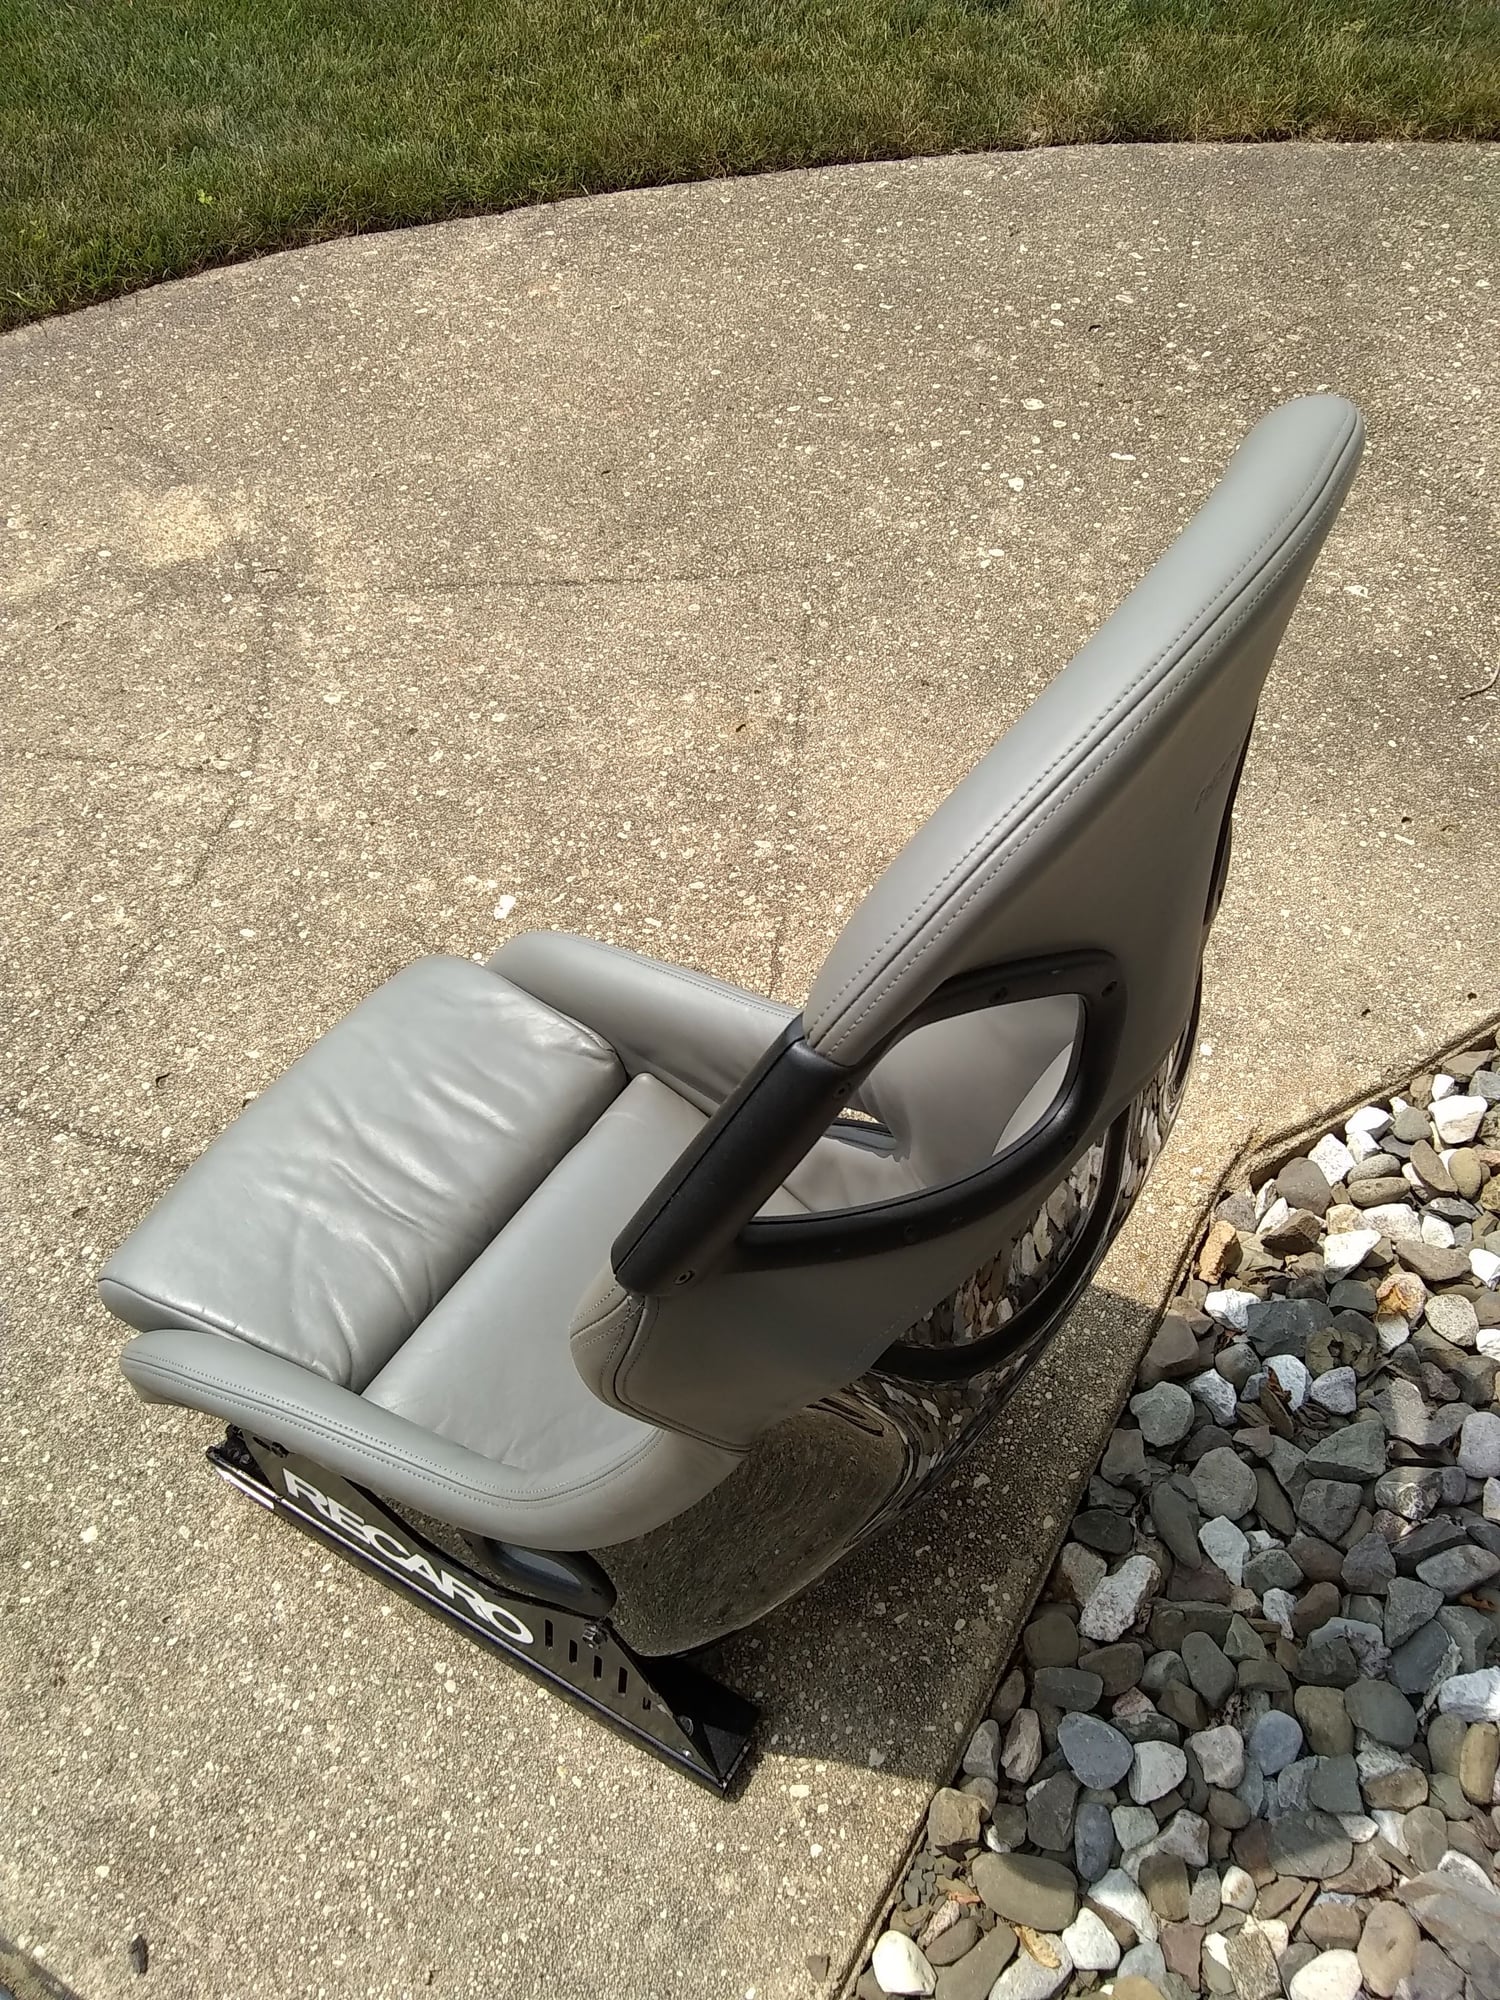 Interior/Upholstery - 996 Euro GT3 Seat - Used - Bellmore, NY 11710, United States